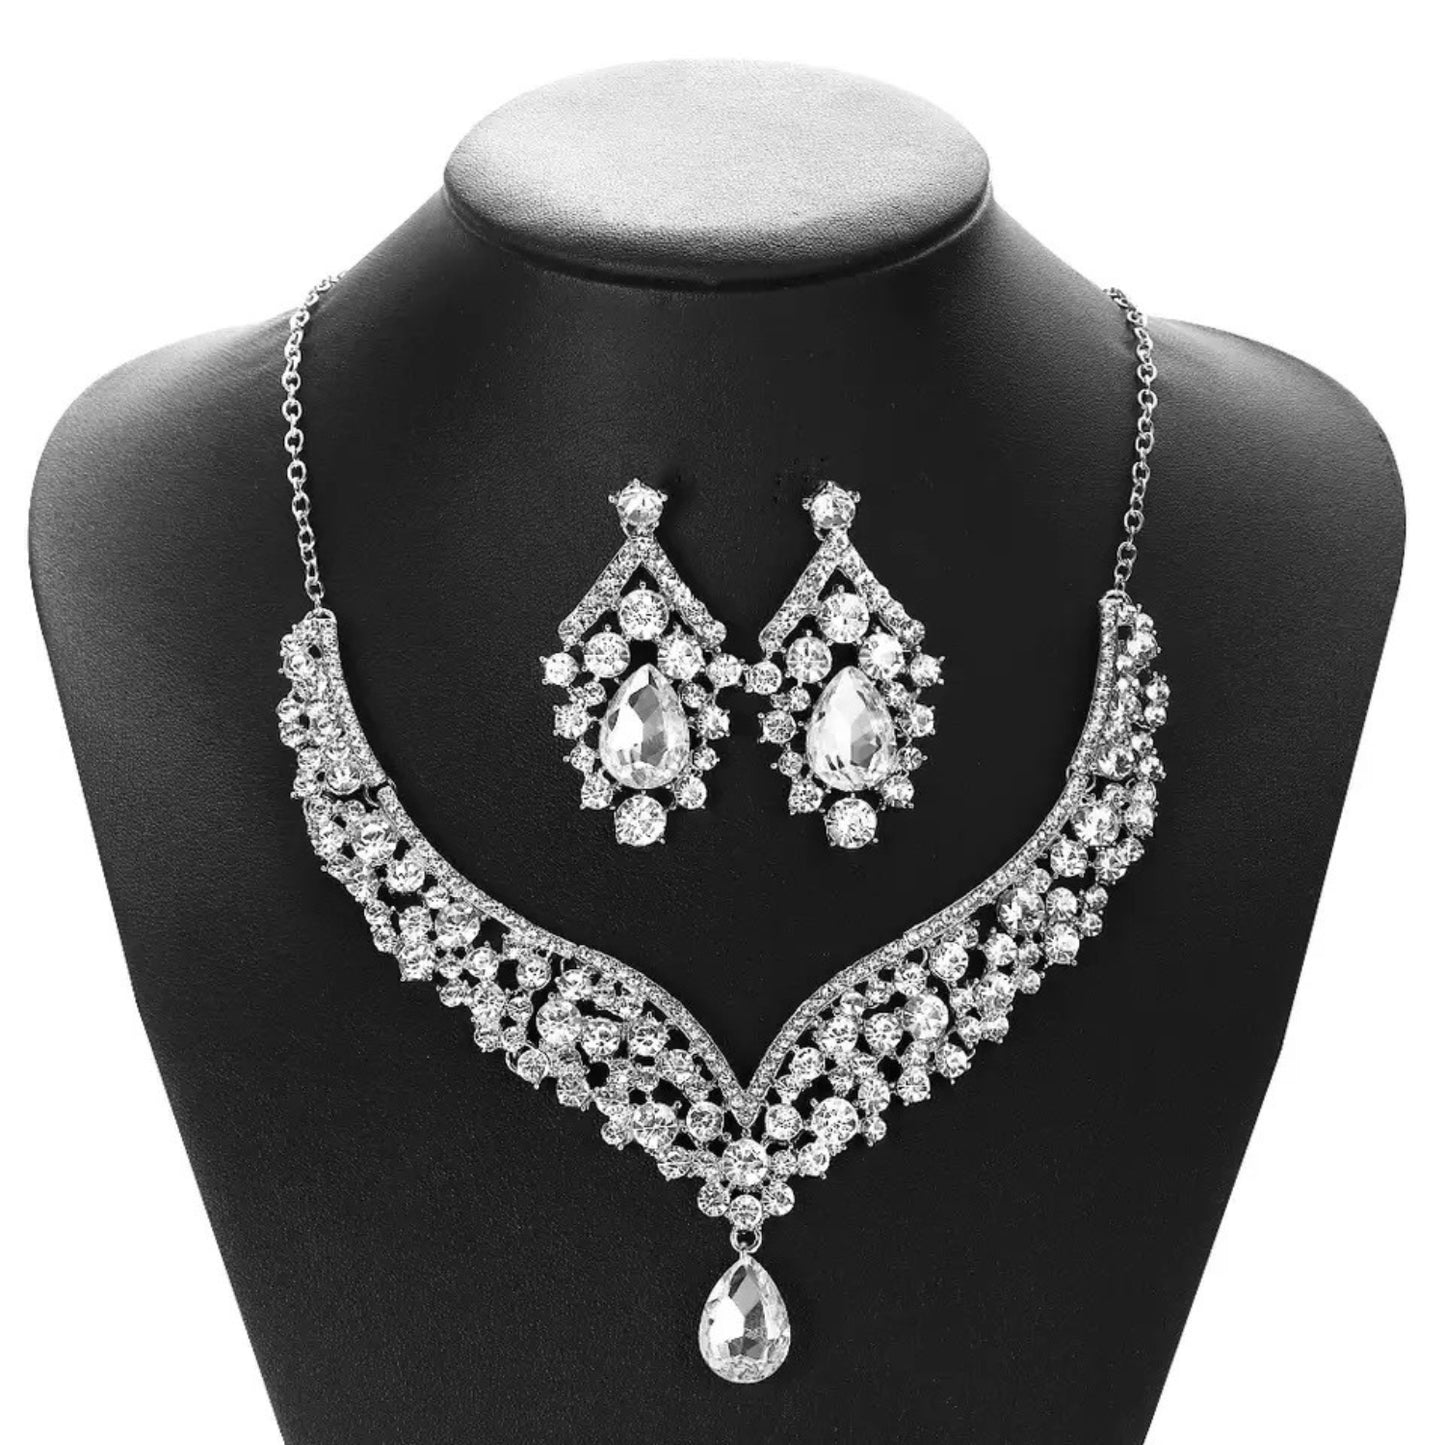 Bride Jewelry Set Silver Crystal Wedding Necklace Earrings Bridal Rhinestone Teardrop Pendant Accessories for Women and Bridesmaids